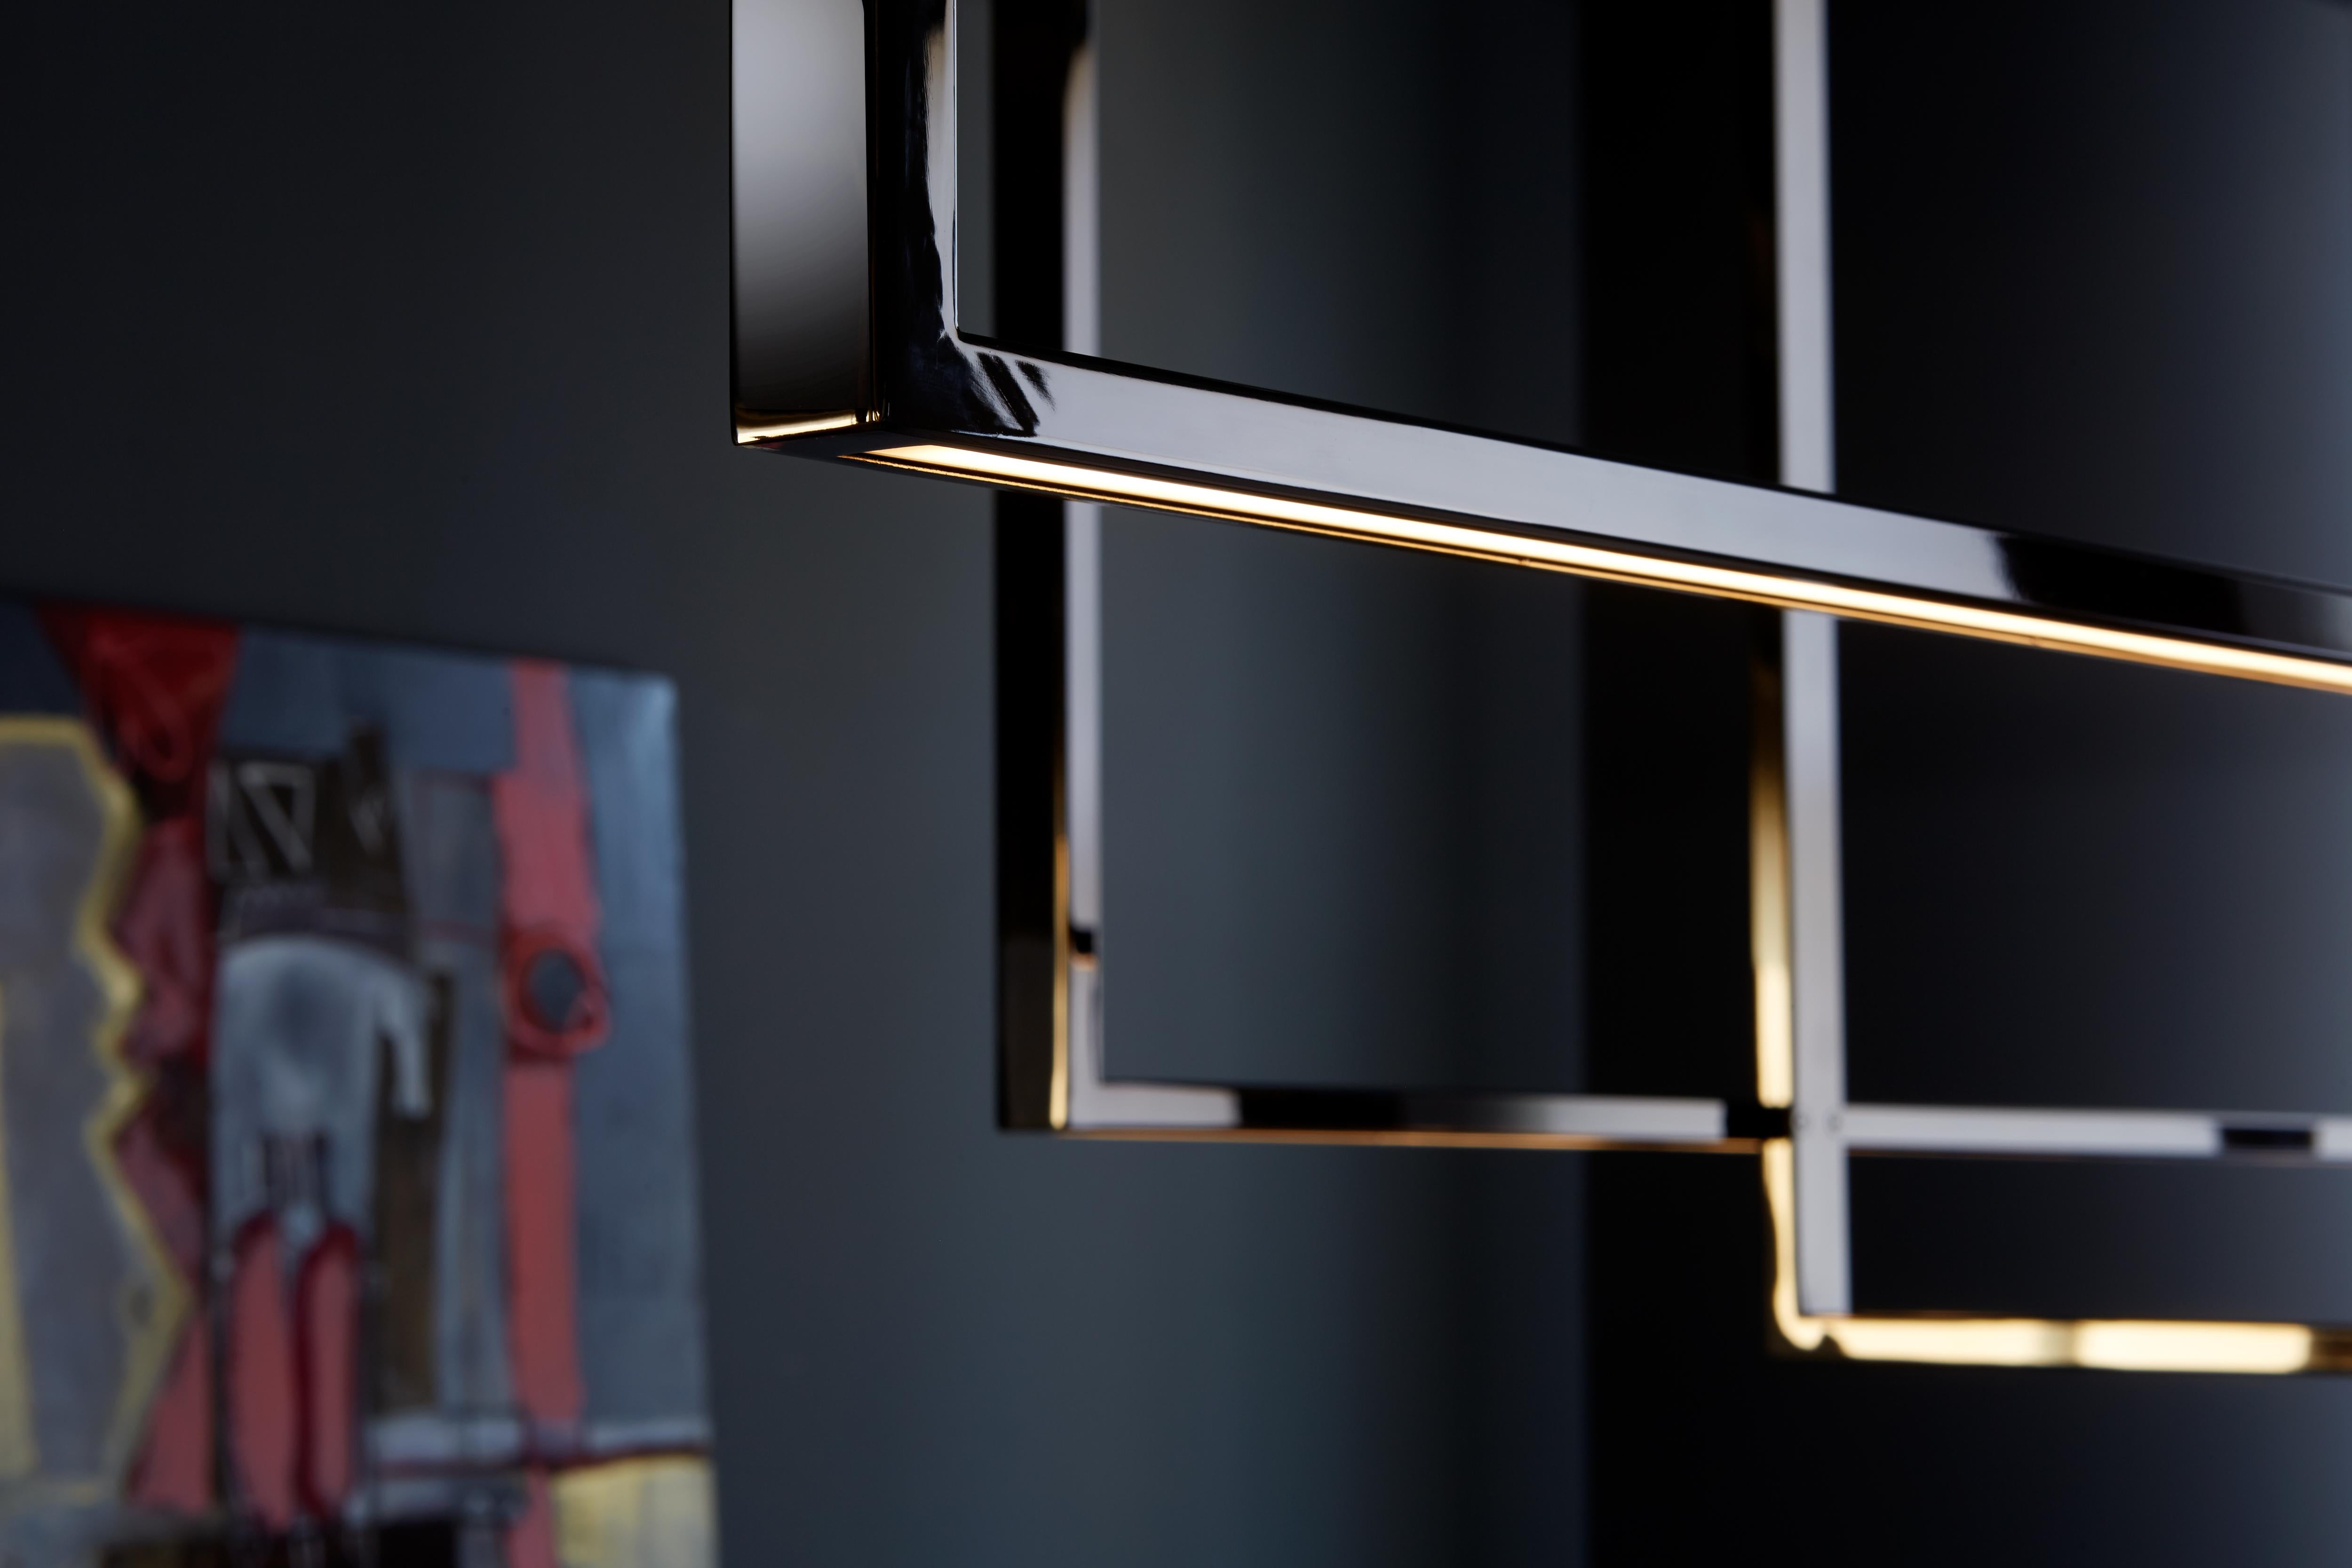 Ceiling lamp with direct and indirect light. Polished or matte black nickel, polished gold or light burnished brass structure.
Specifications: Function:
Ceiling location: Interior
Light emission: Direct and indirect light
Light source: Strip LED